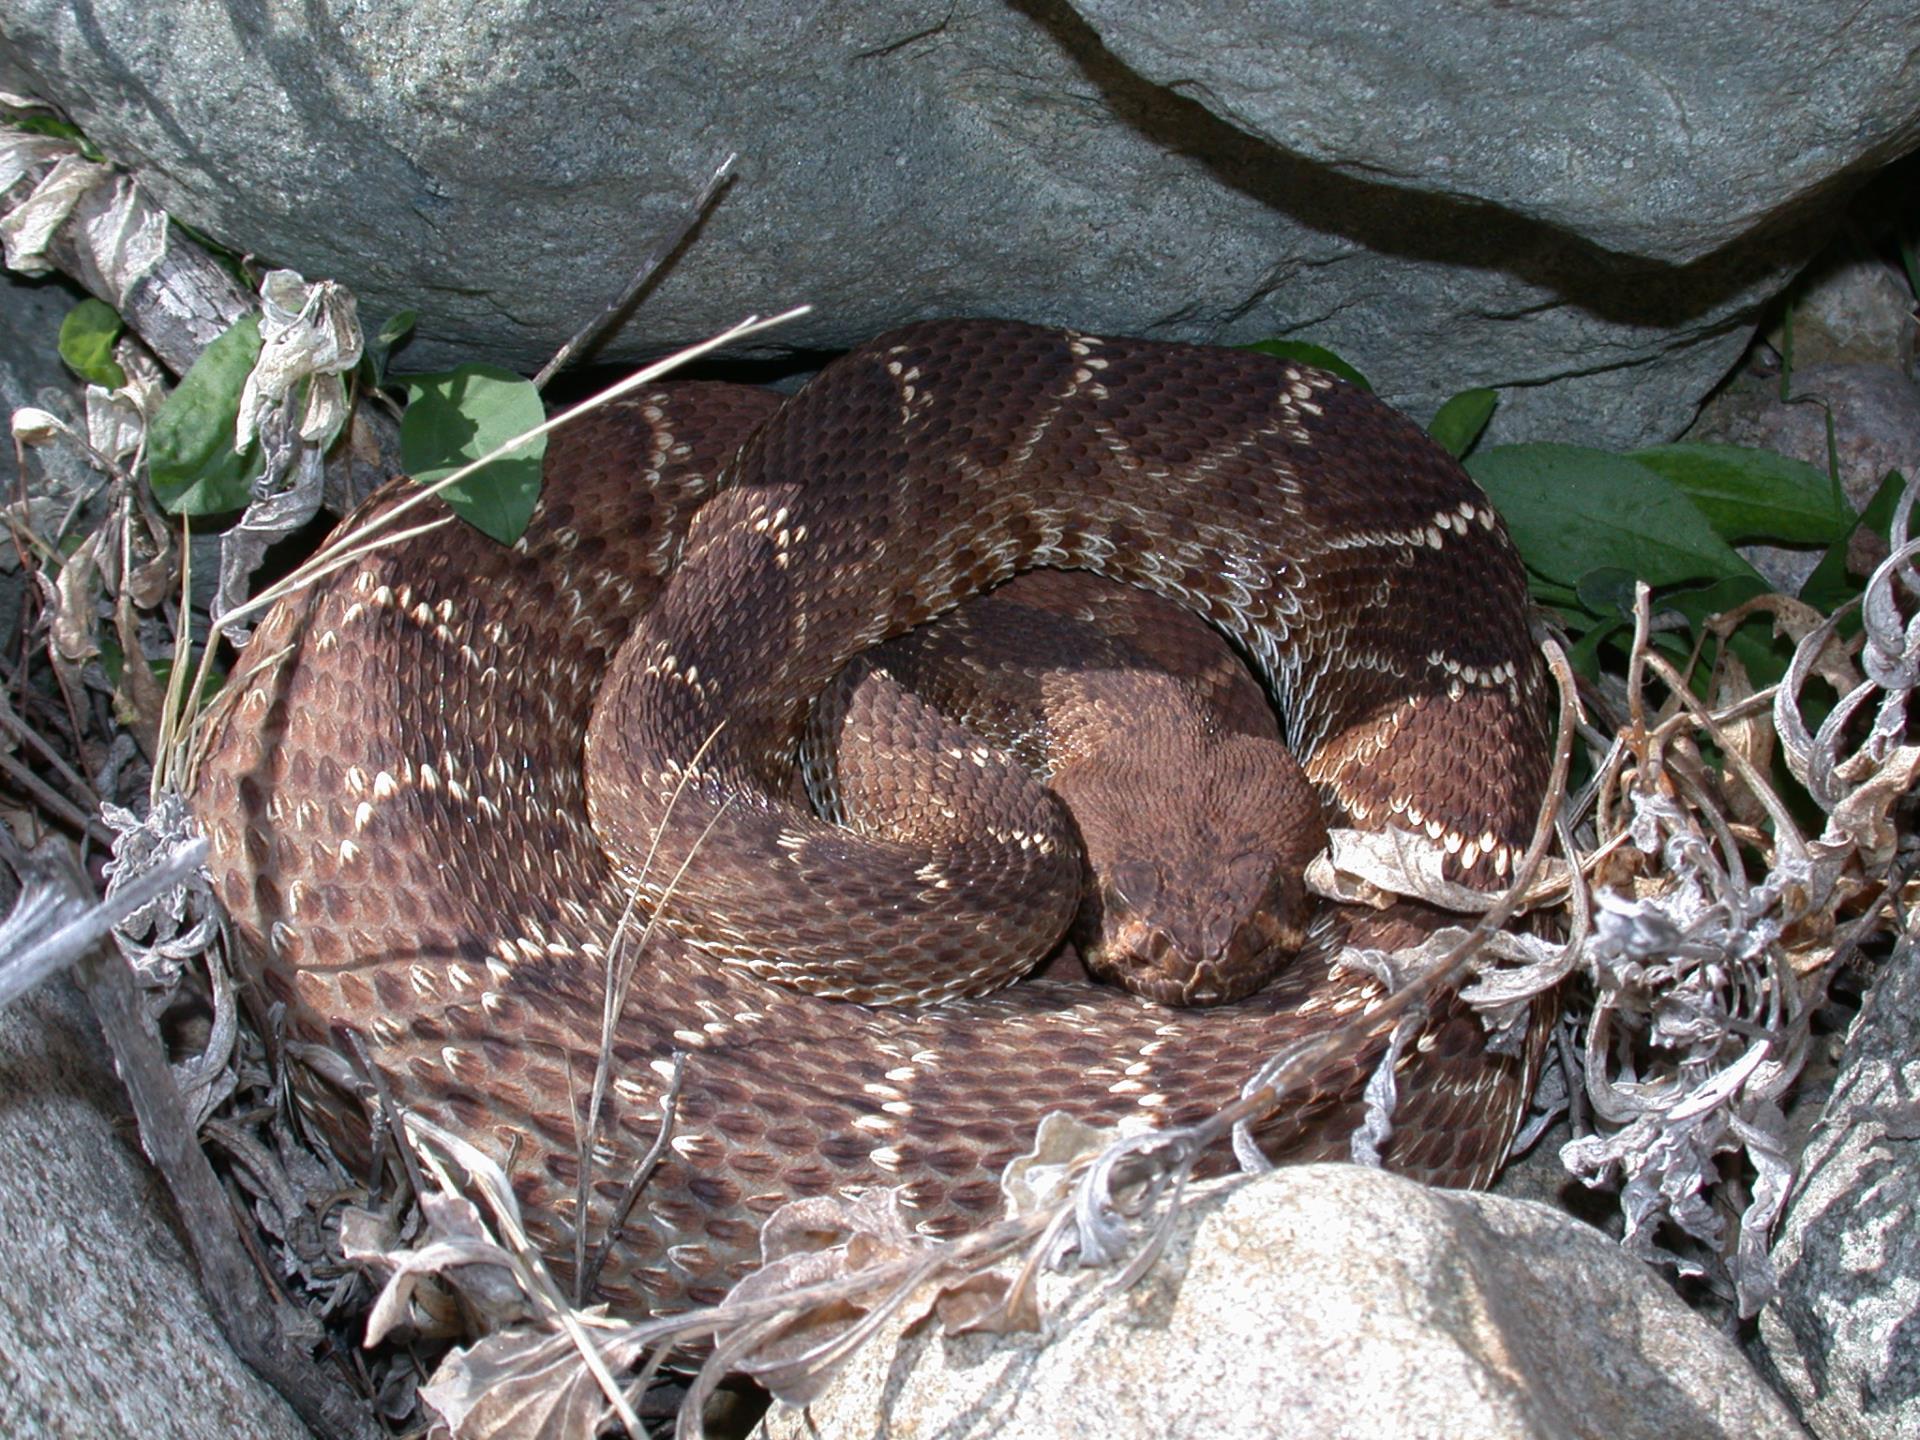 Coiled up rattlesnake in the rocks